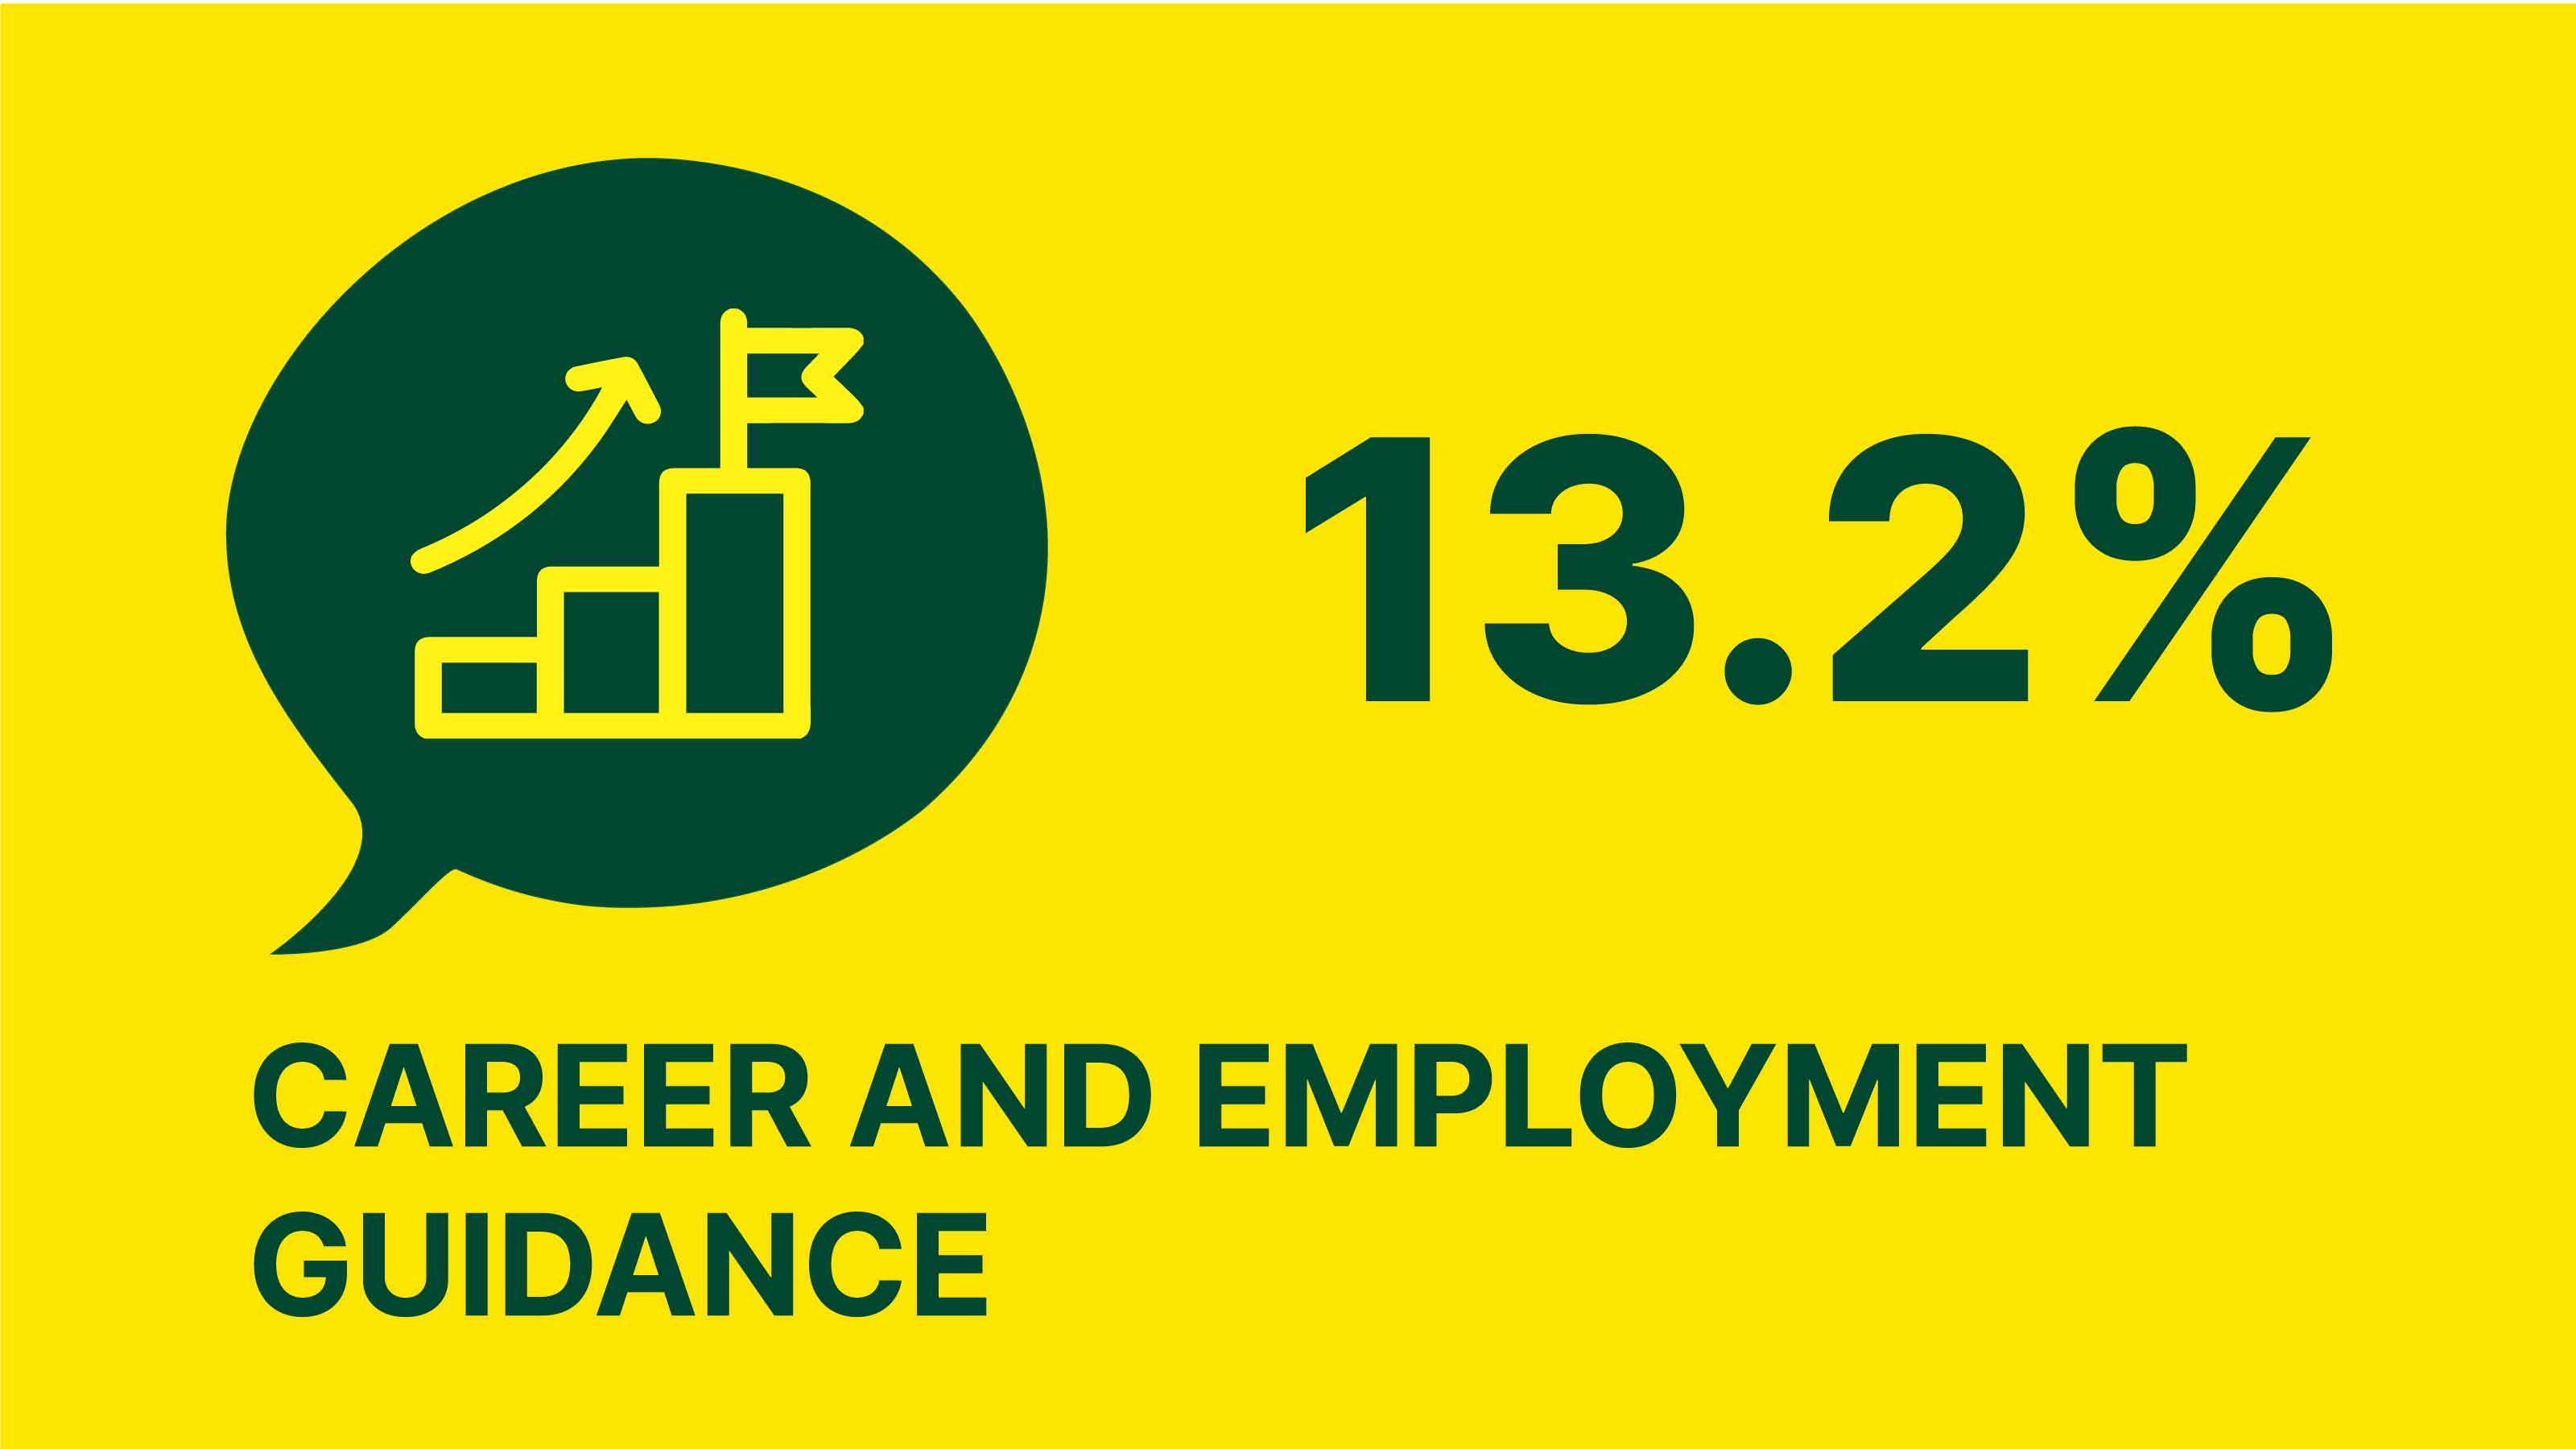 Infographic showing 13.2% of the levy goes to career and employment guidance